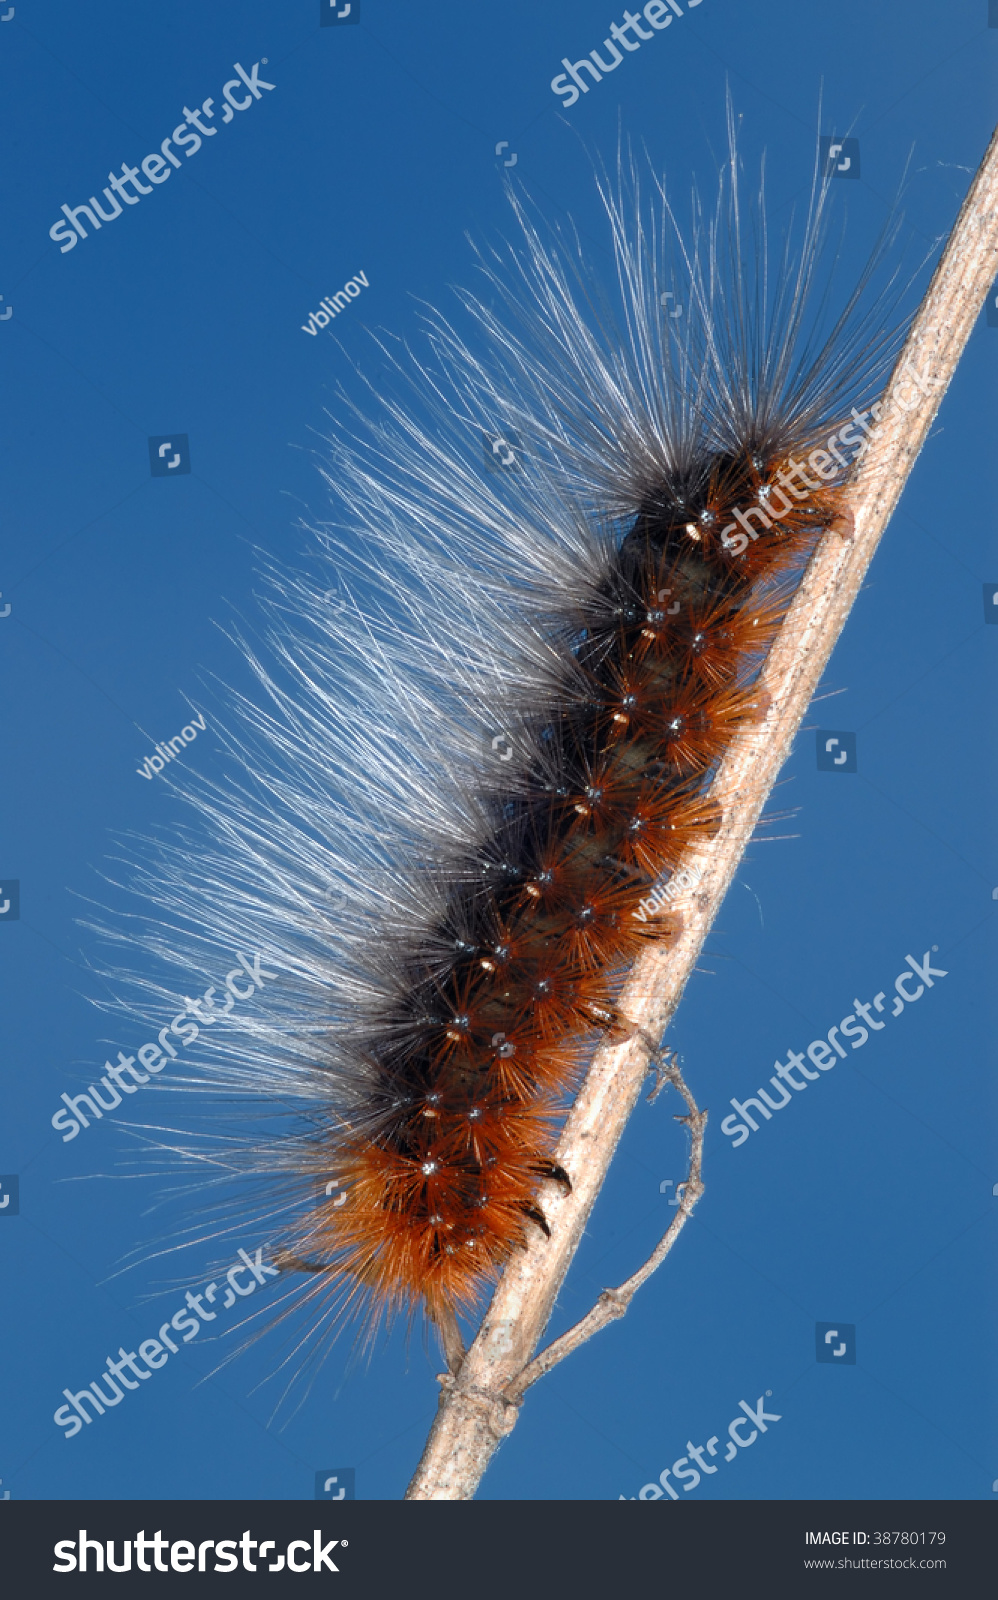 Black Caterpillar With Long Hairs Of Orange And White Color Stock Photo